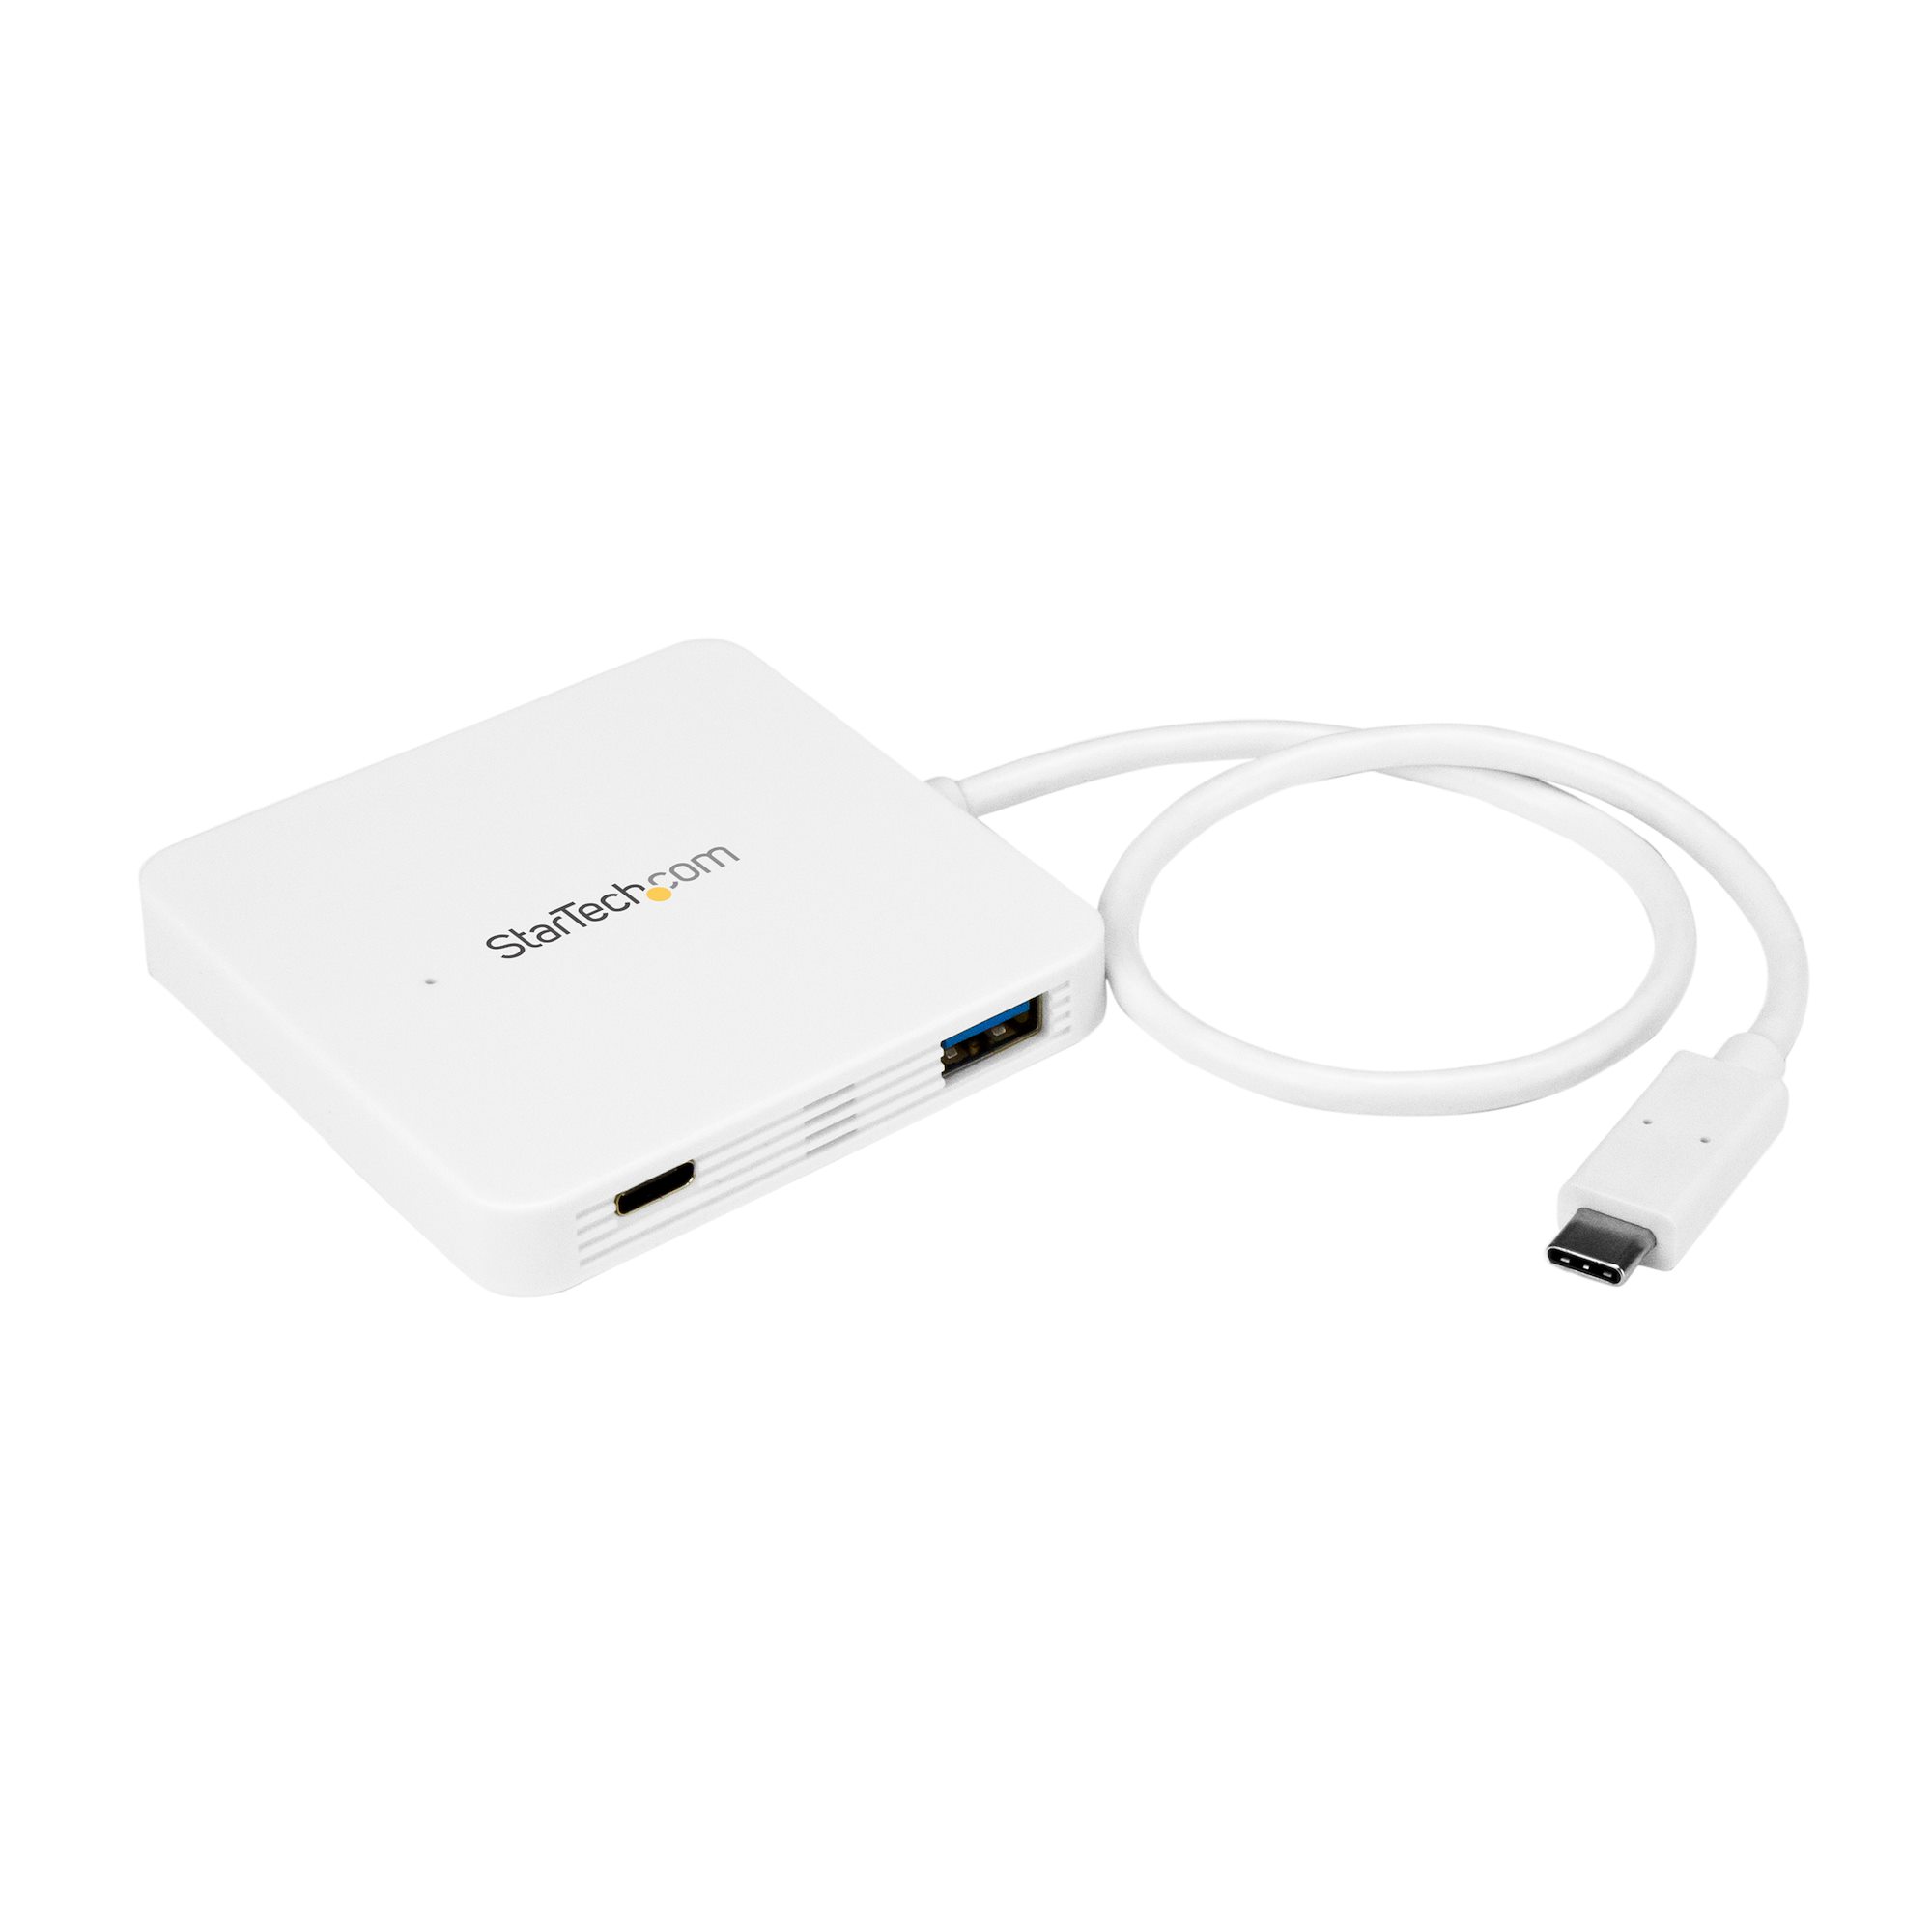 Usb c power delivery. STARTECH Type c to USB 3.0 Hub. Dell USB 3.0 Hub. USB-C Power delivery 3.0. USB-хаб Yoobao YB-h1c3a/c-PD.